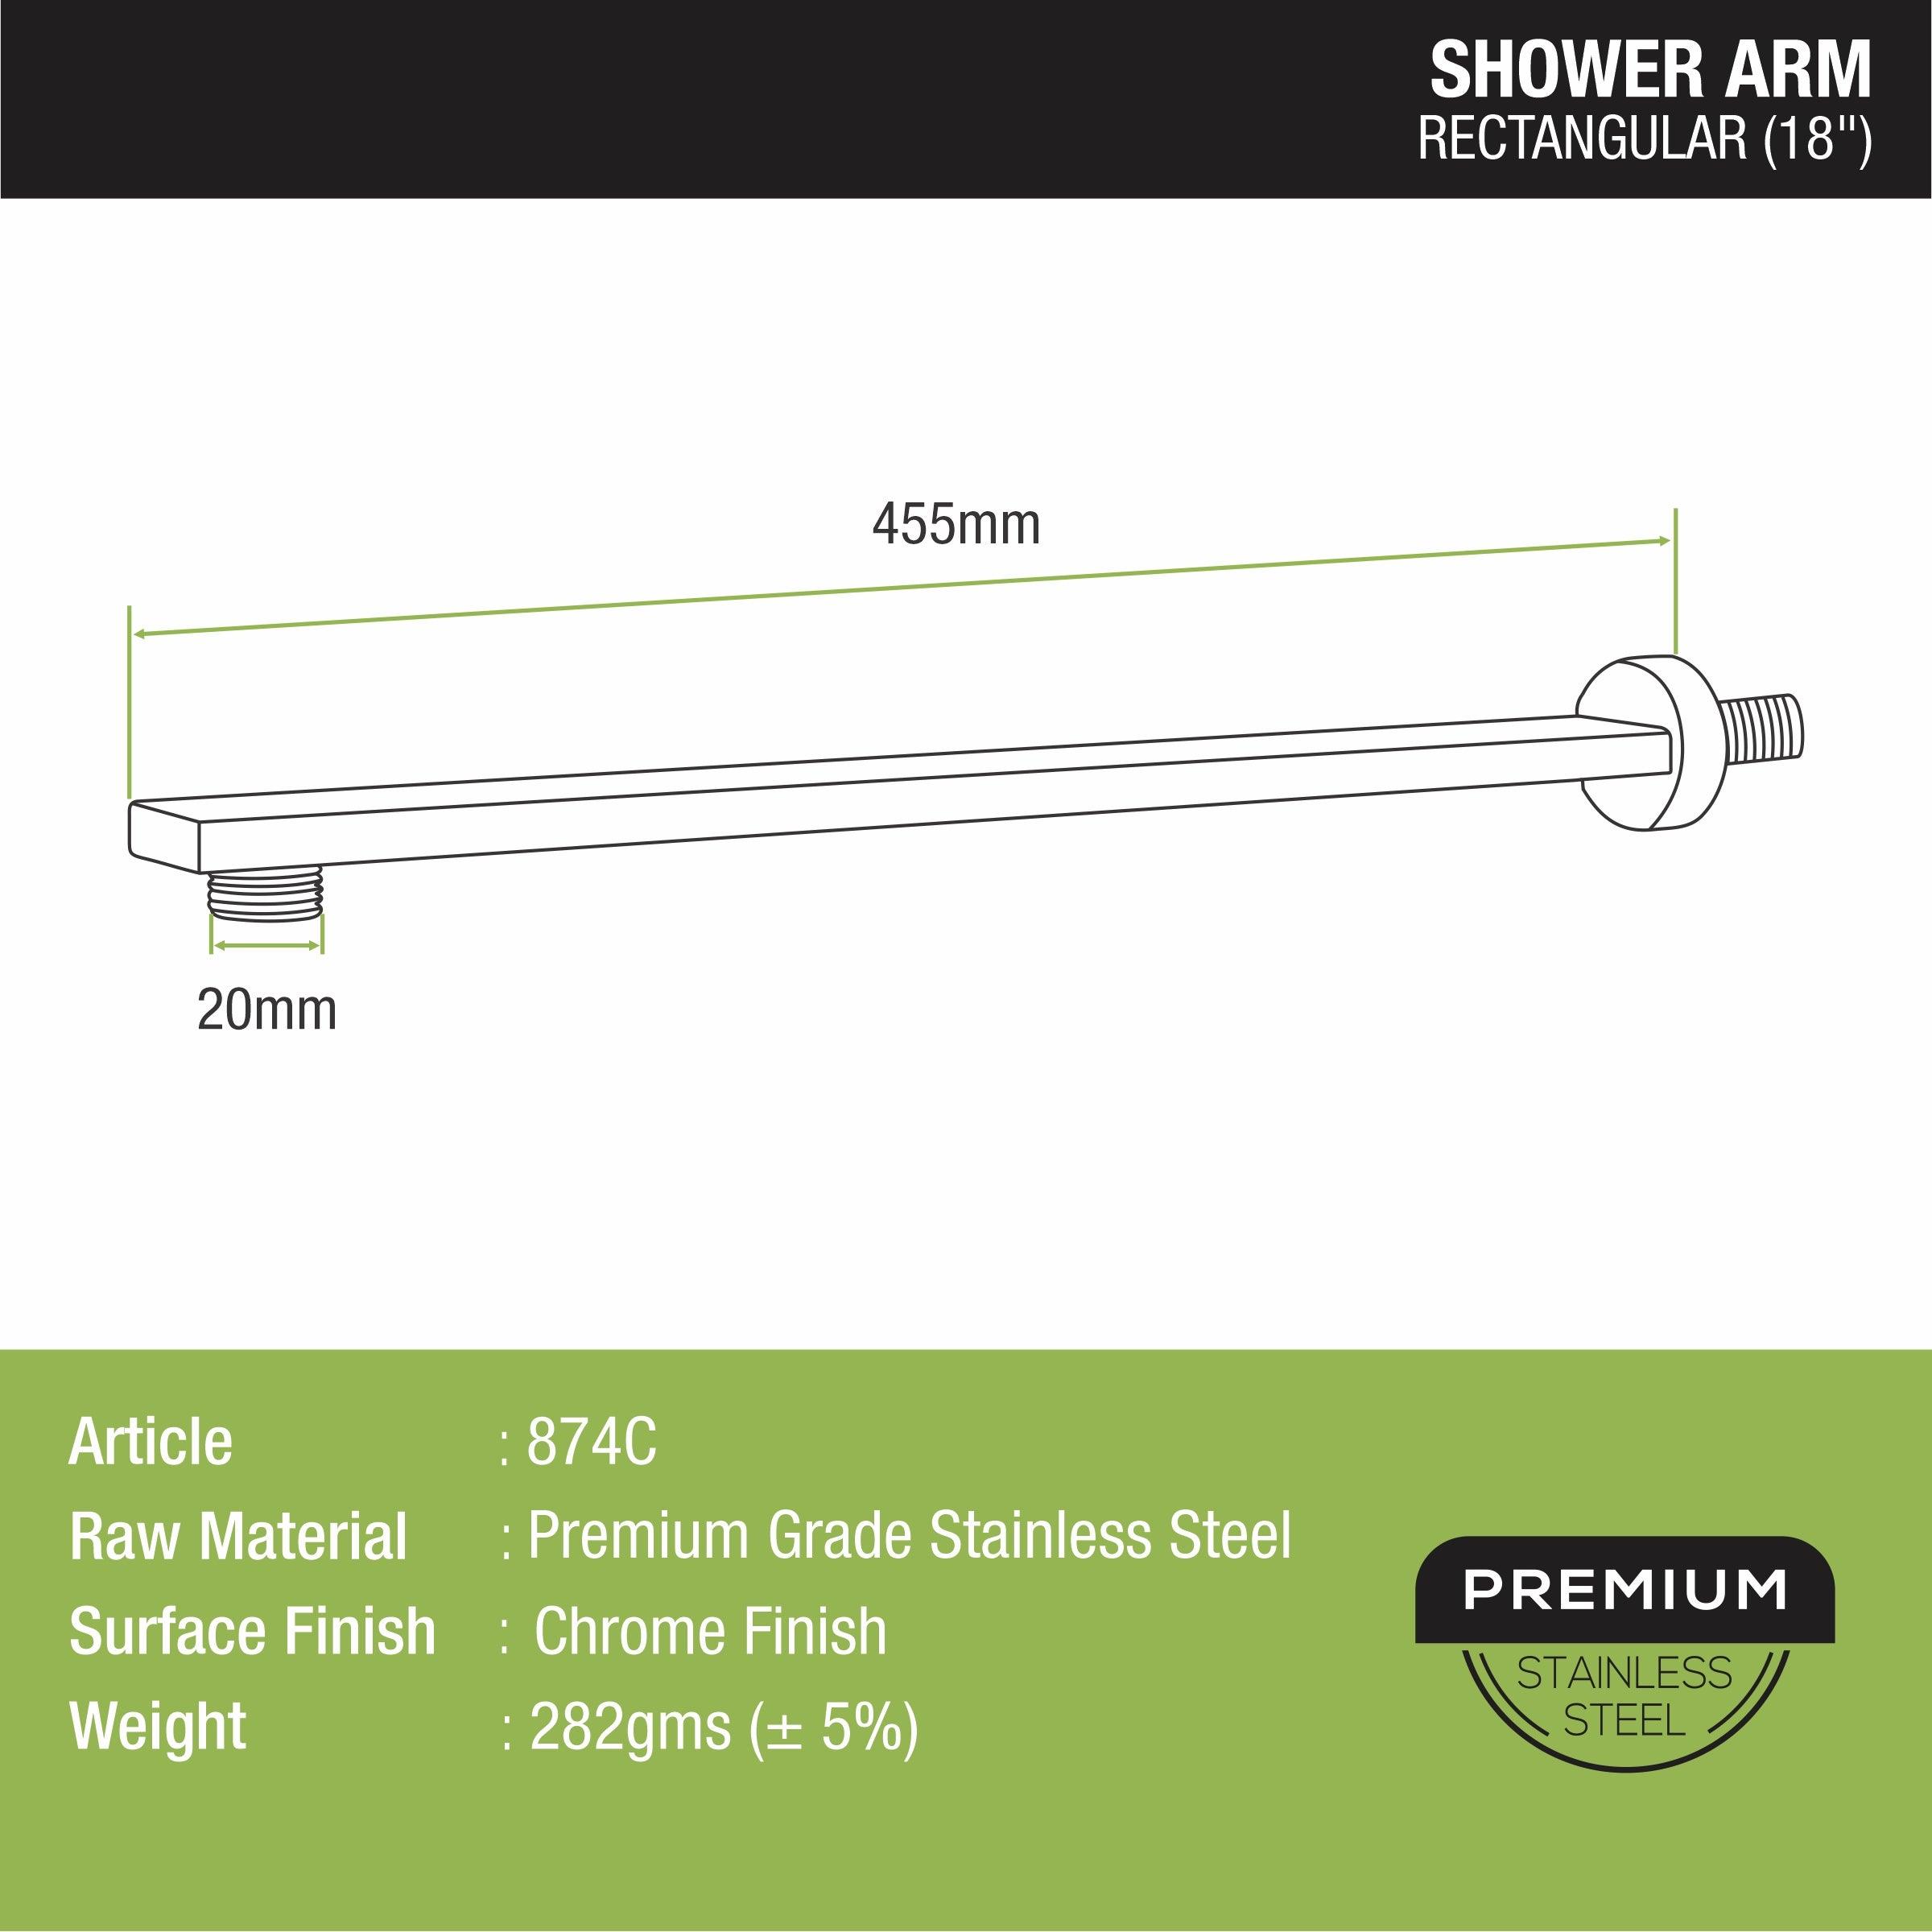 Rectangular Shower Arm (18 Inches) sizes and dimensions